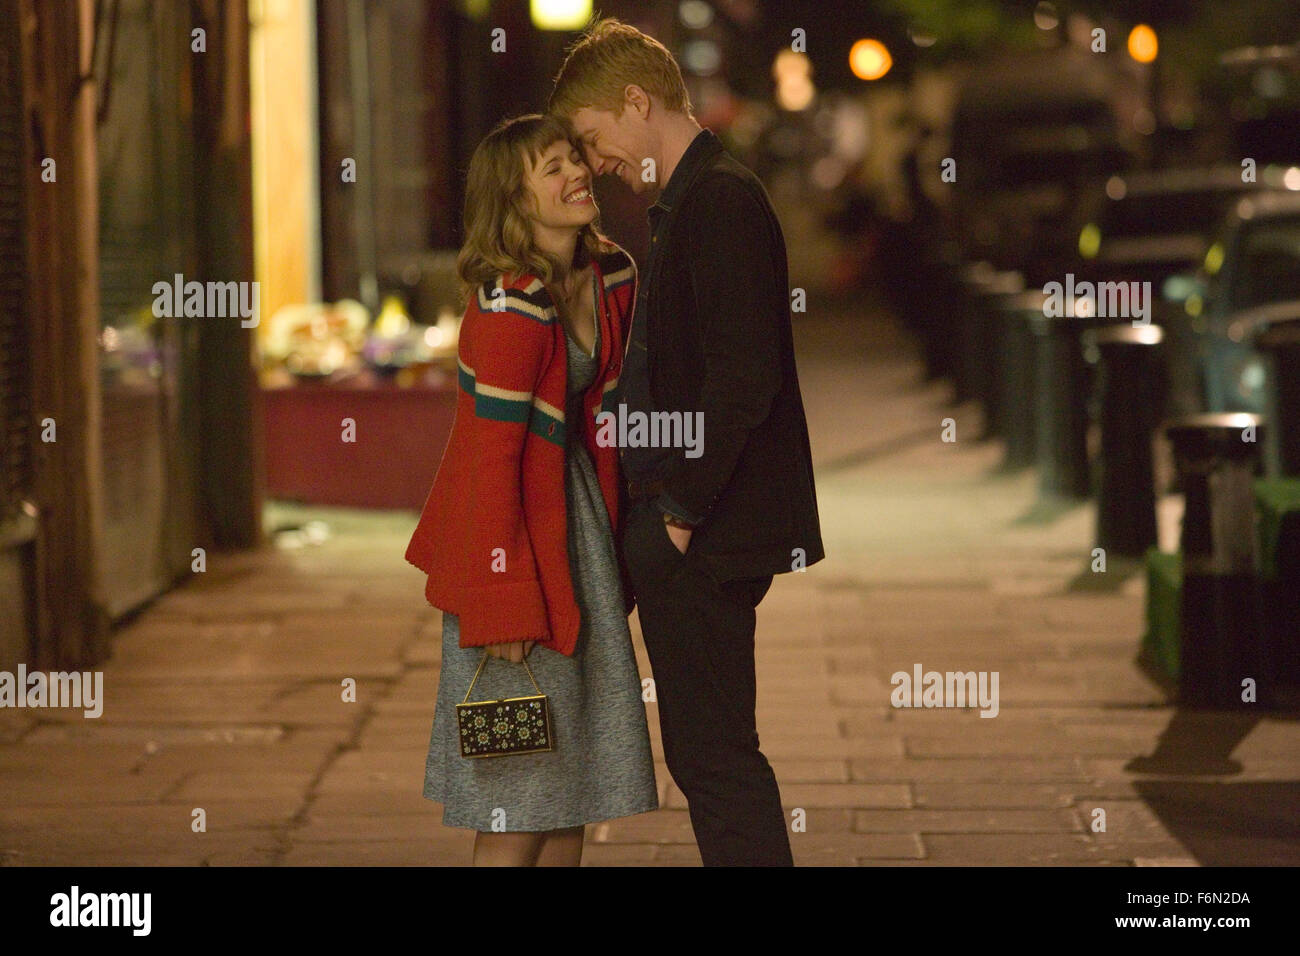 RELEASE DATE: November 8, 2013 TITLE: About Time STUDIO: Universal Pictures DIRECTOR: Richard Curtis PLOT: At the age of 21, Tim discovers he can travel in time and change what happens and has happened in his own life. His decision to make his world a better place by getting a girlfriend turns out not to be as easy as you might think PICTURED: RACHEL MCADAMS as Mary and DOMHNALL GLEESON as Tim (Credit: c Universal Pictures/Entertainment Pictures) Stock Photo